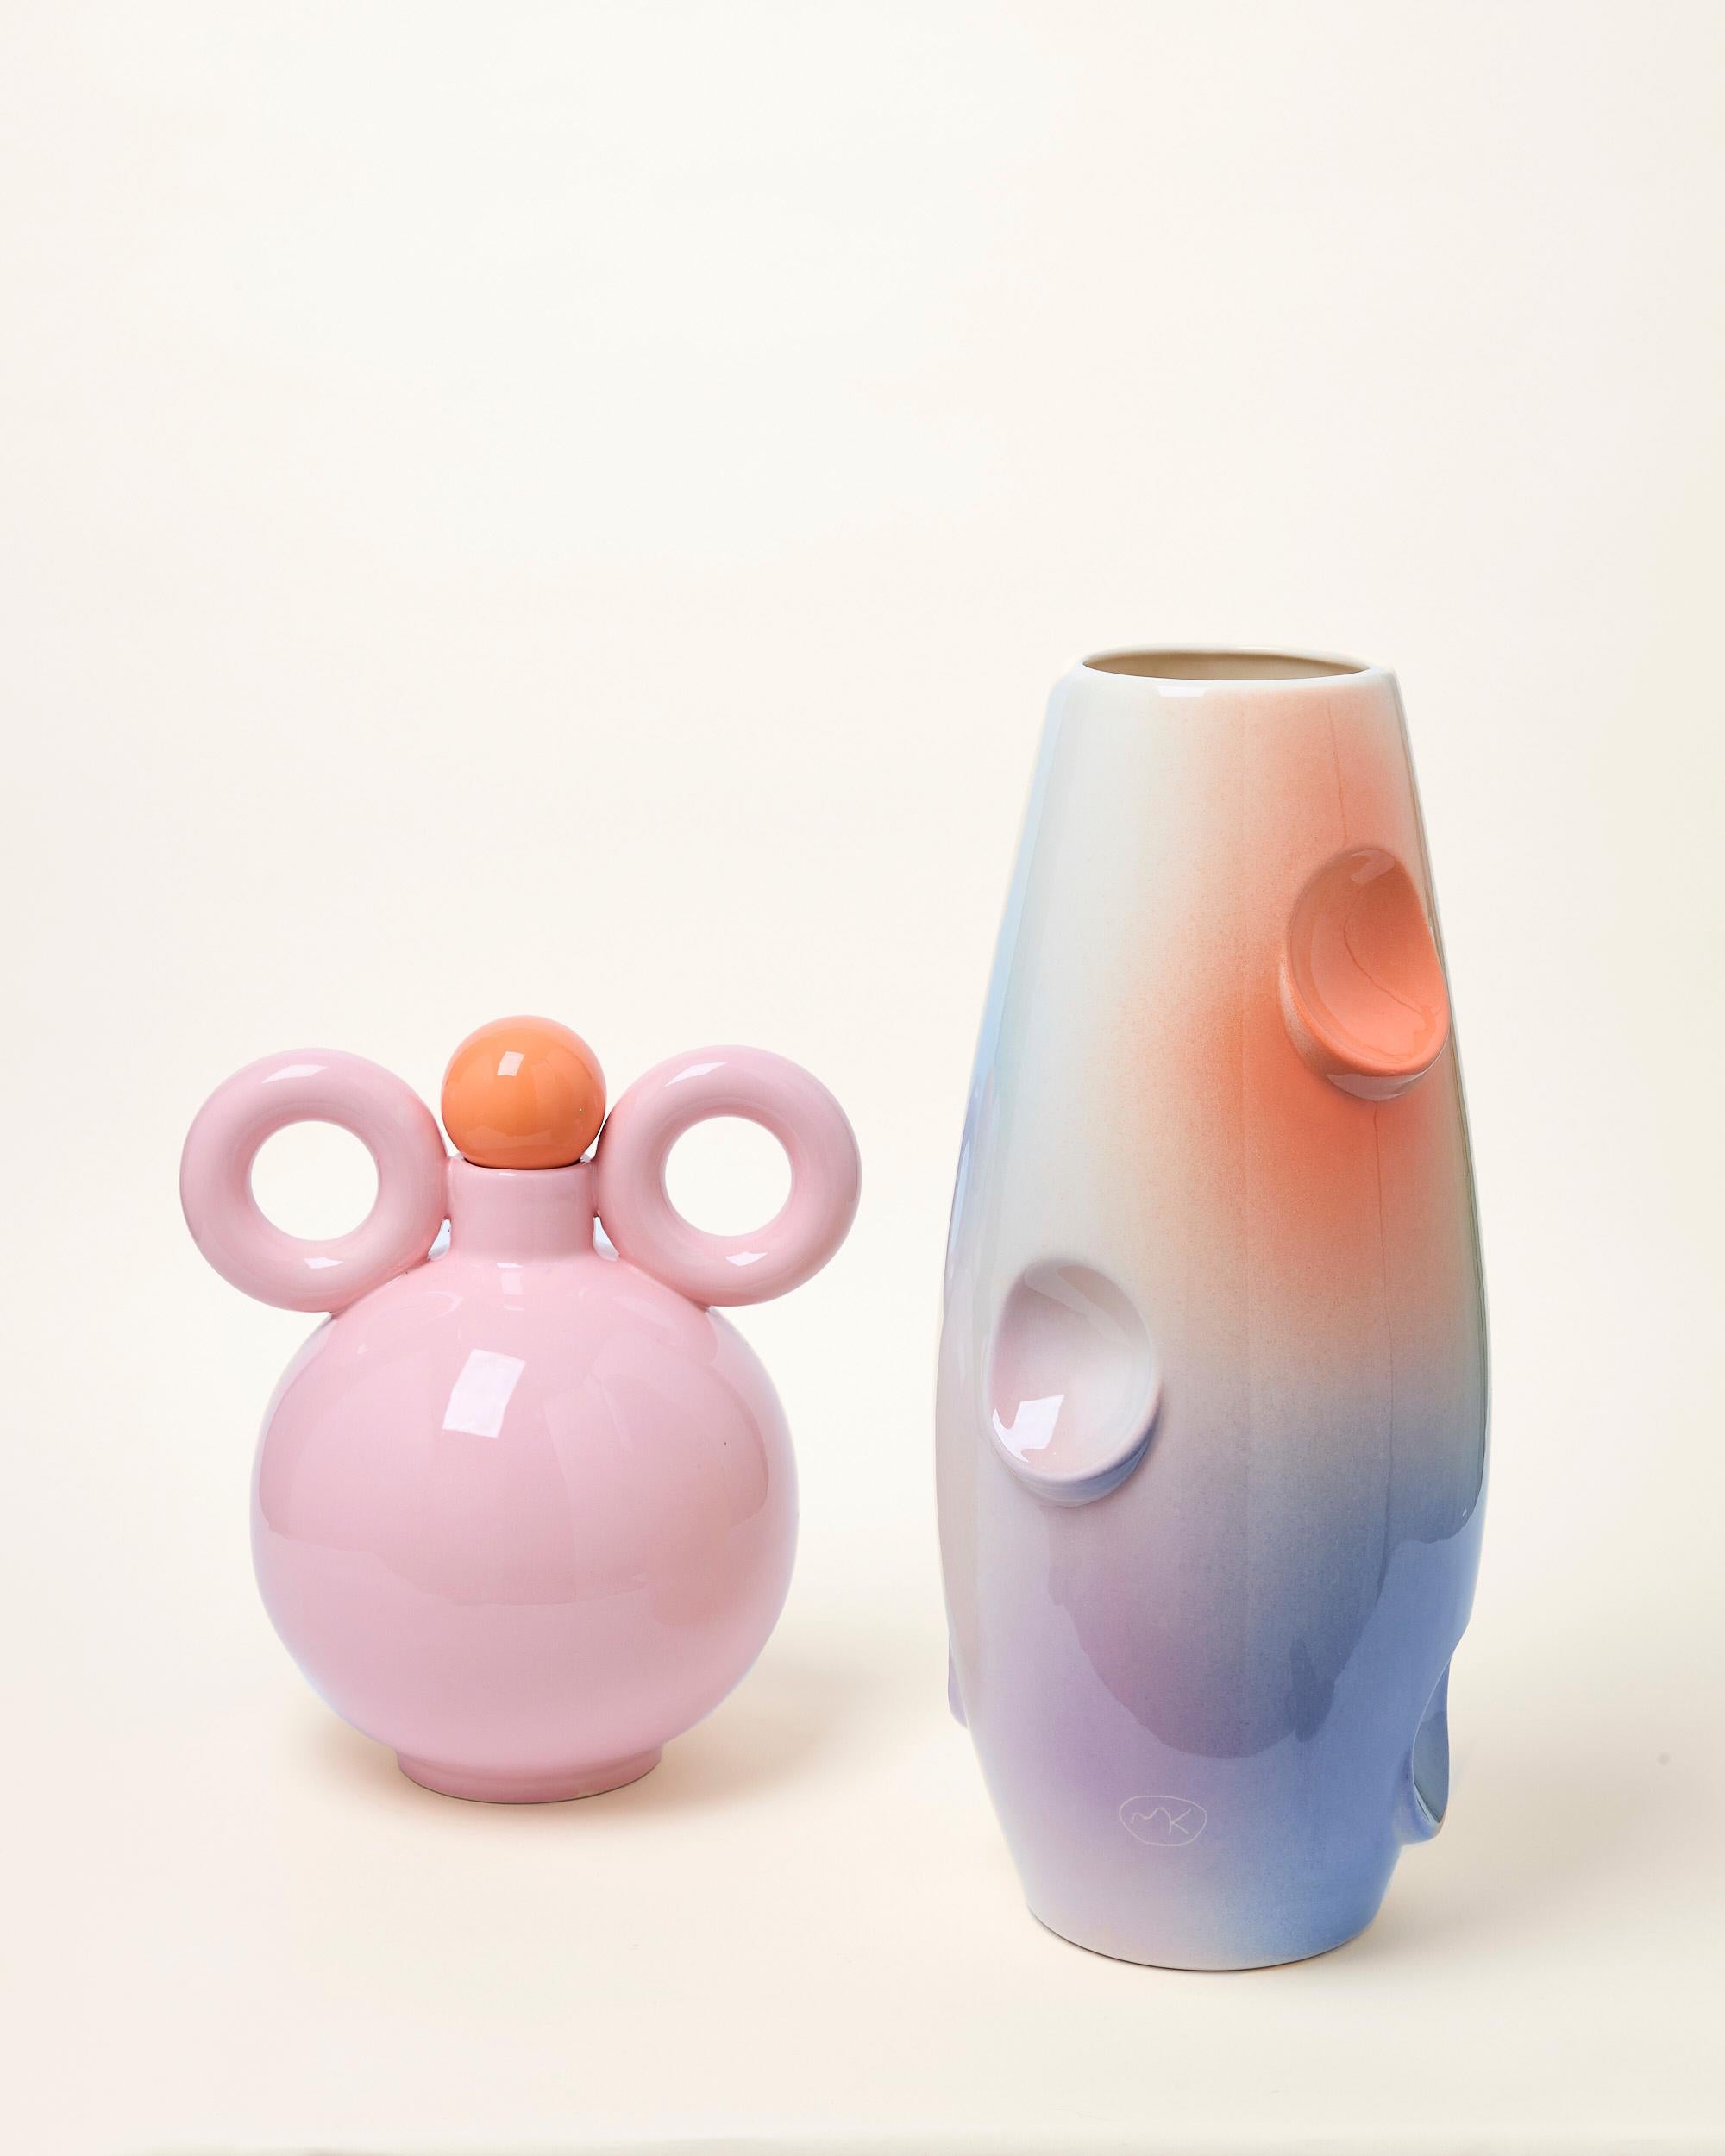 OKO Vase is the most famous design by Malwina Konopacka. Its name comes from the oval recesses in the body of the vase, which give the object a spatial character and make it function as a standalone sculpture when there are no flowers in it.

The